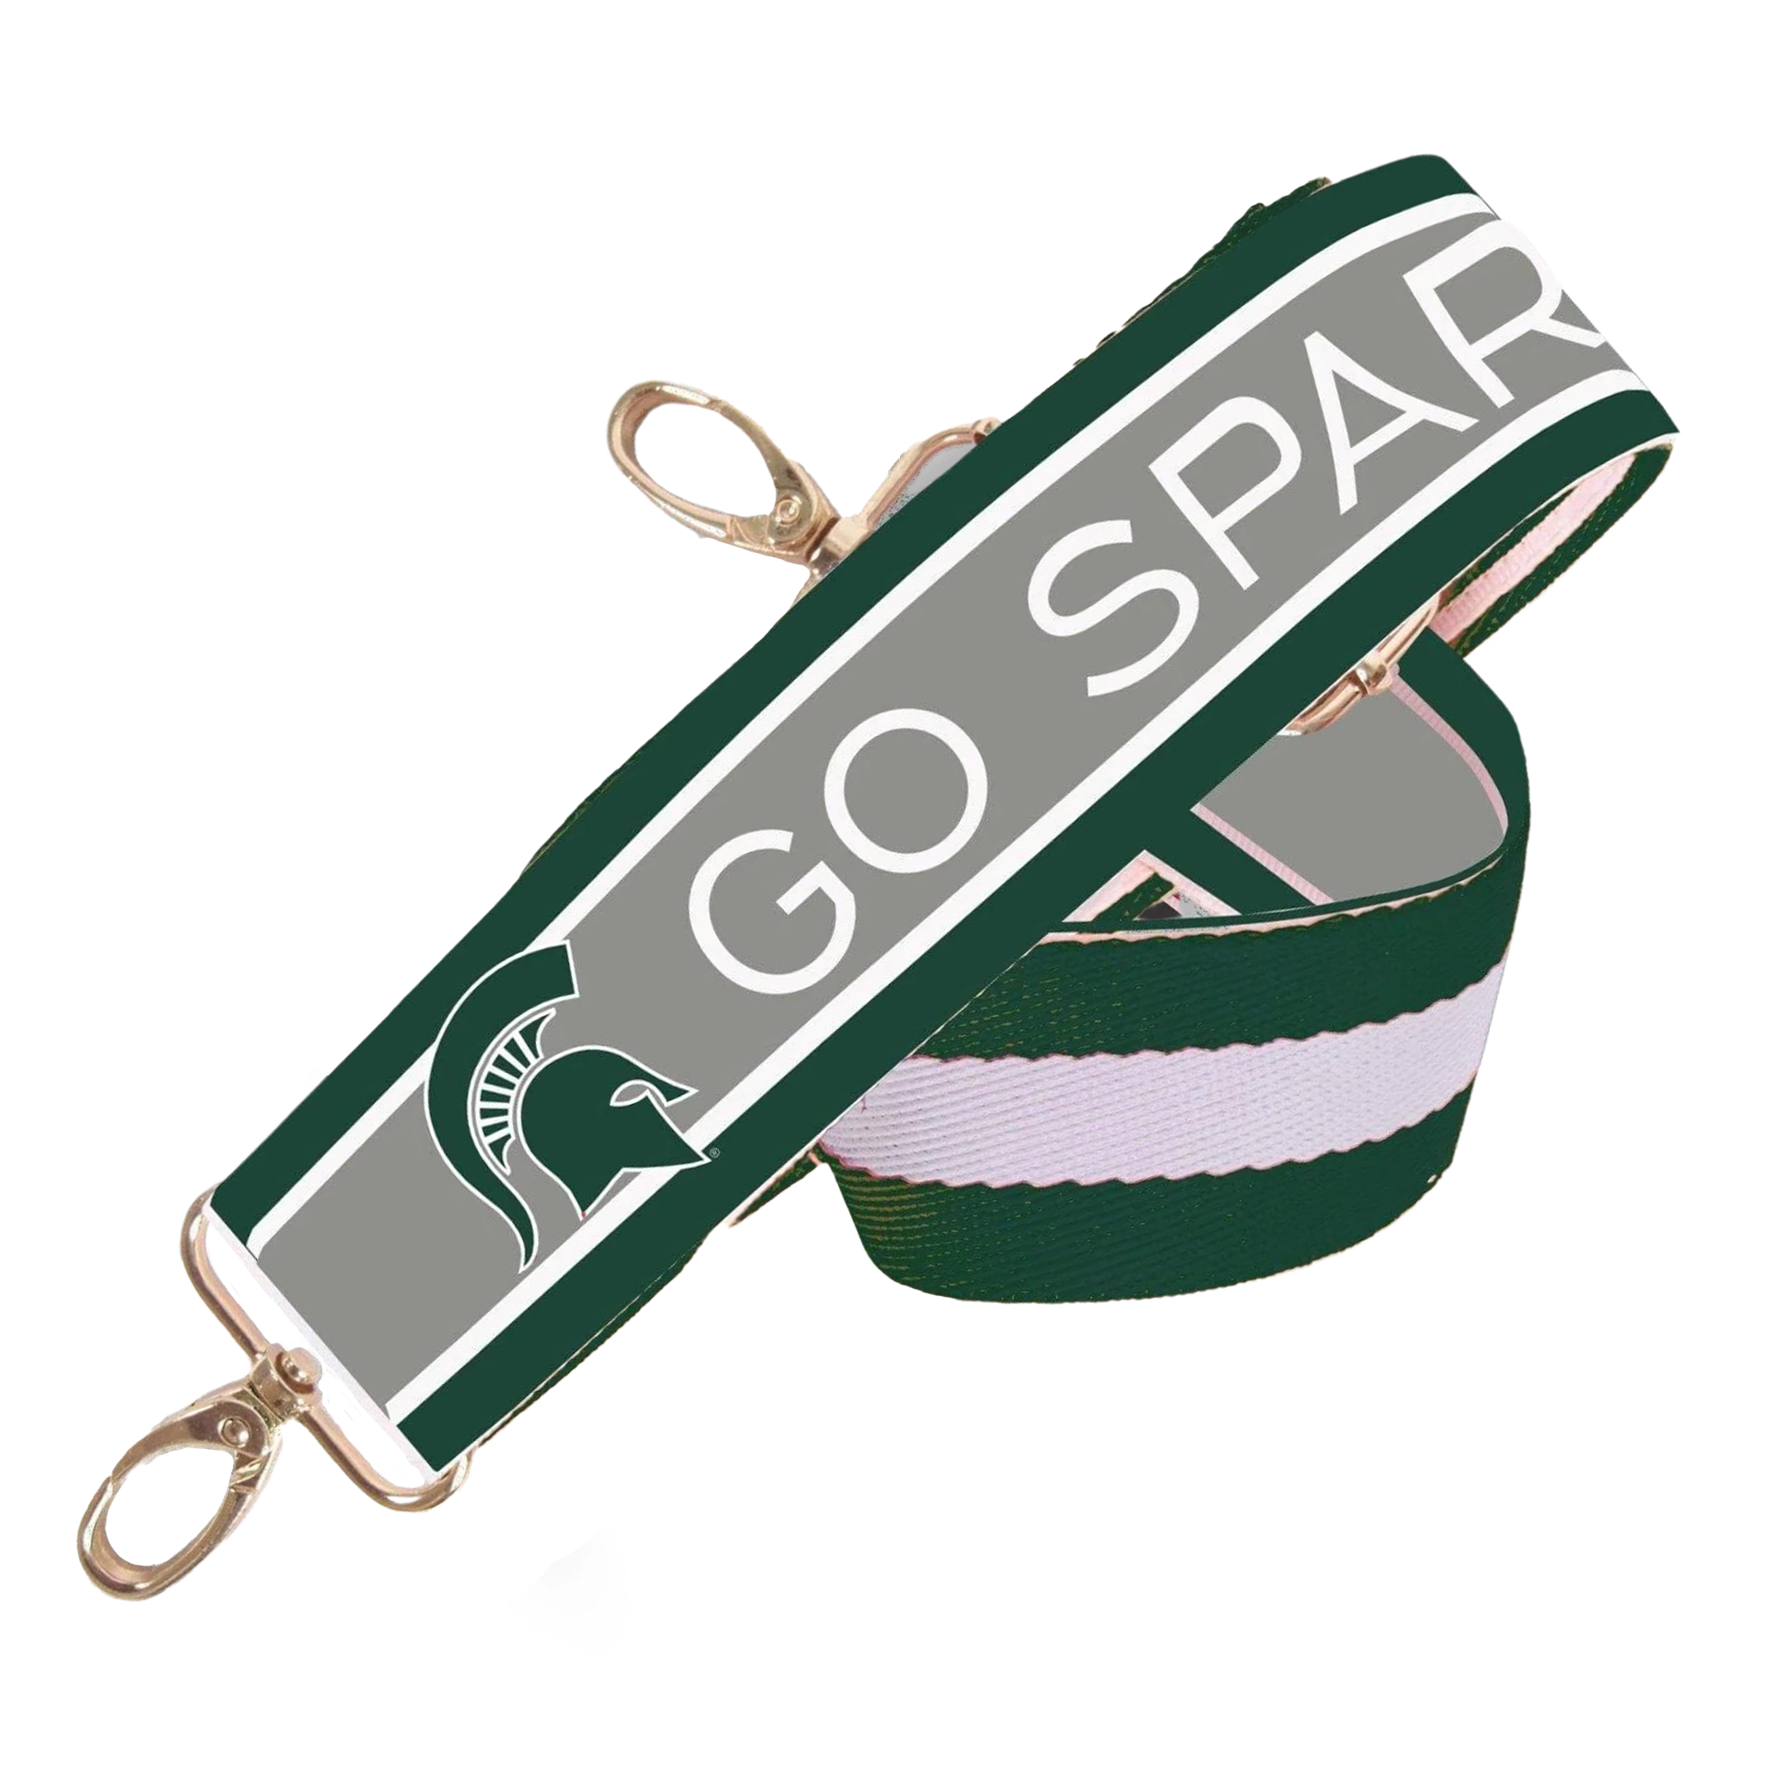 MICHIGAN STATE 1.5" - Officially Licensed - Stripe